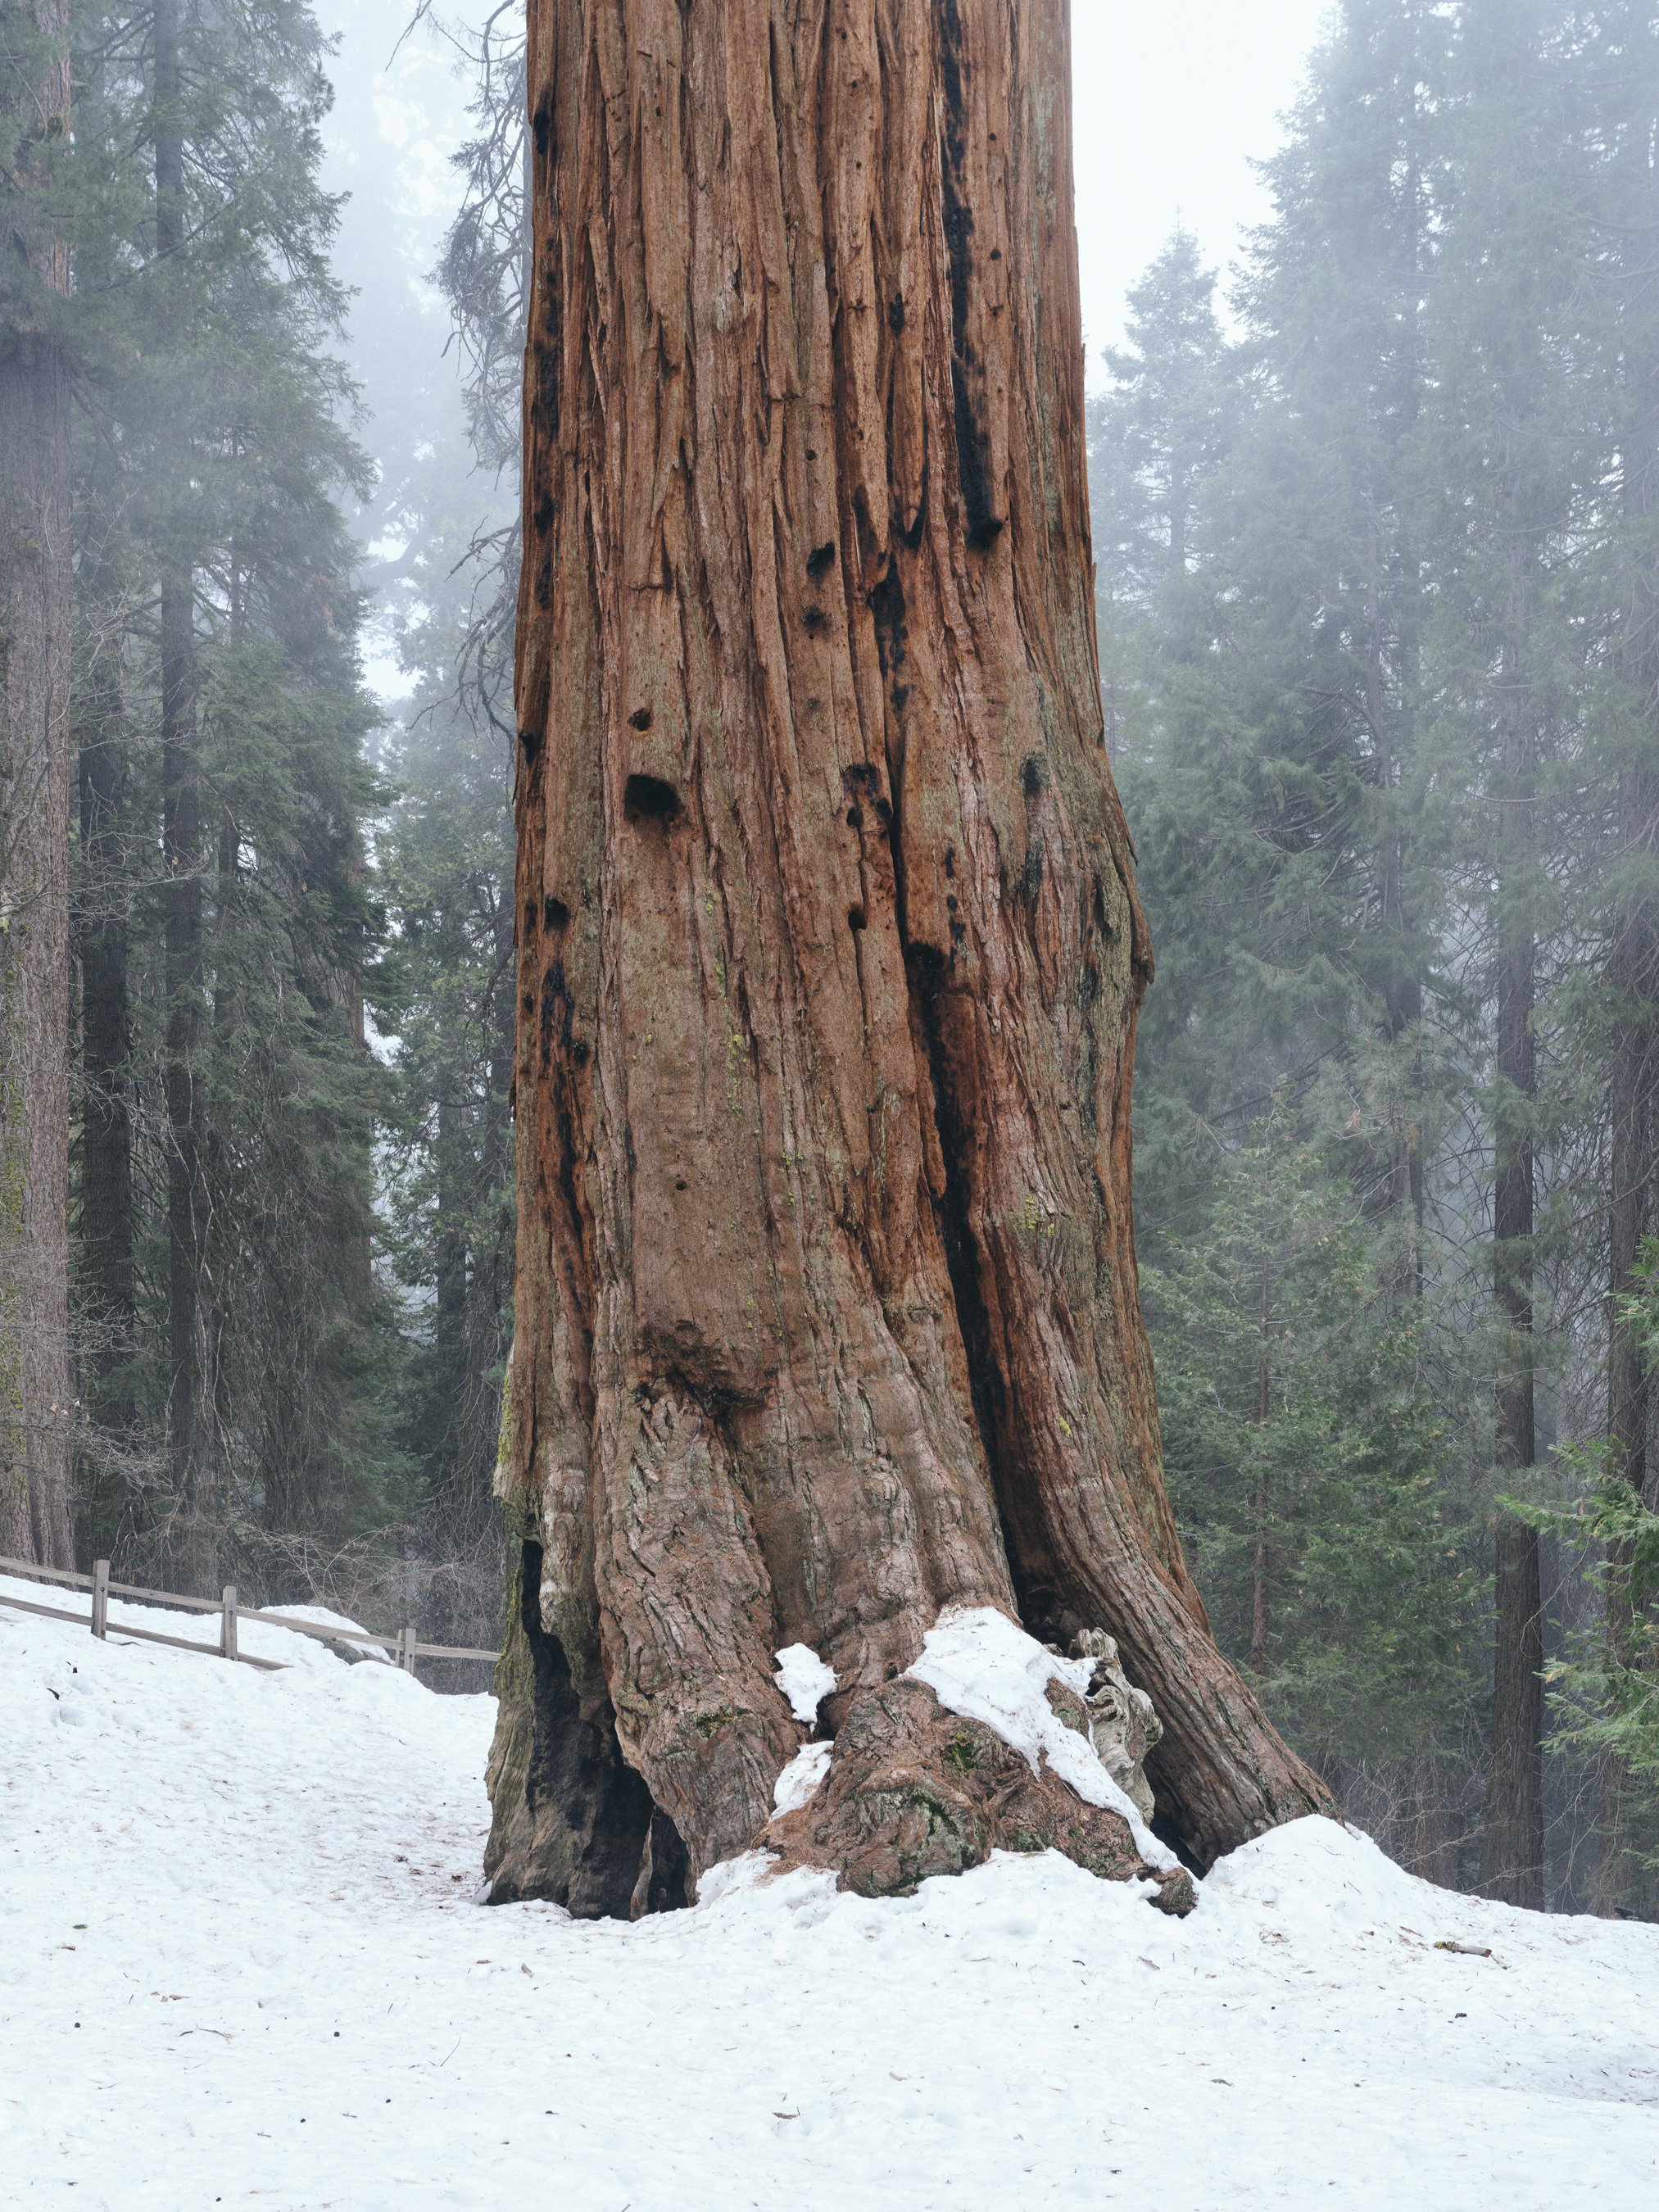 gathering_growth_foundation_sequoia_kings_canyon_national_park_california__general_grant_01_brian_kelley_01_31_2022_11.jpg